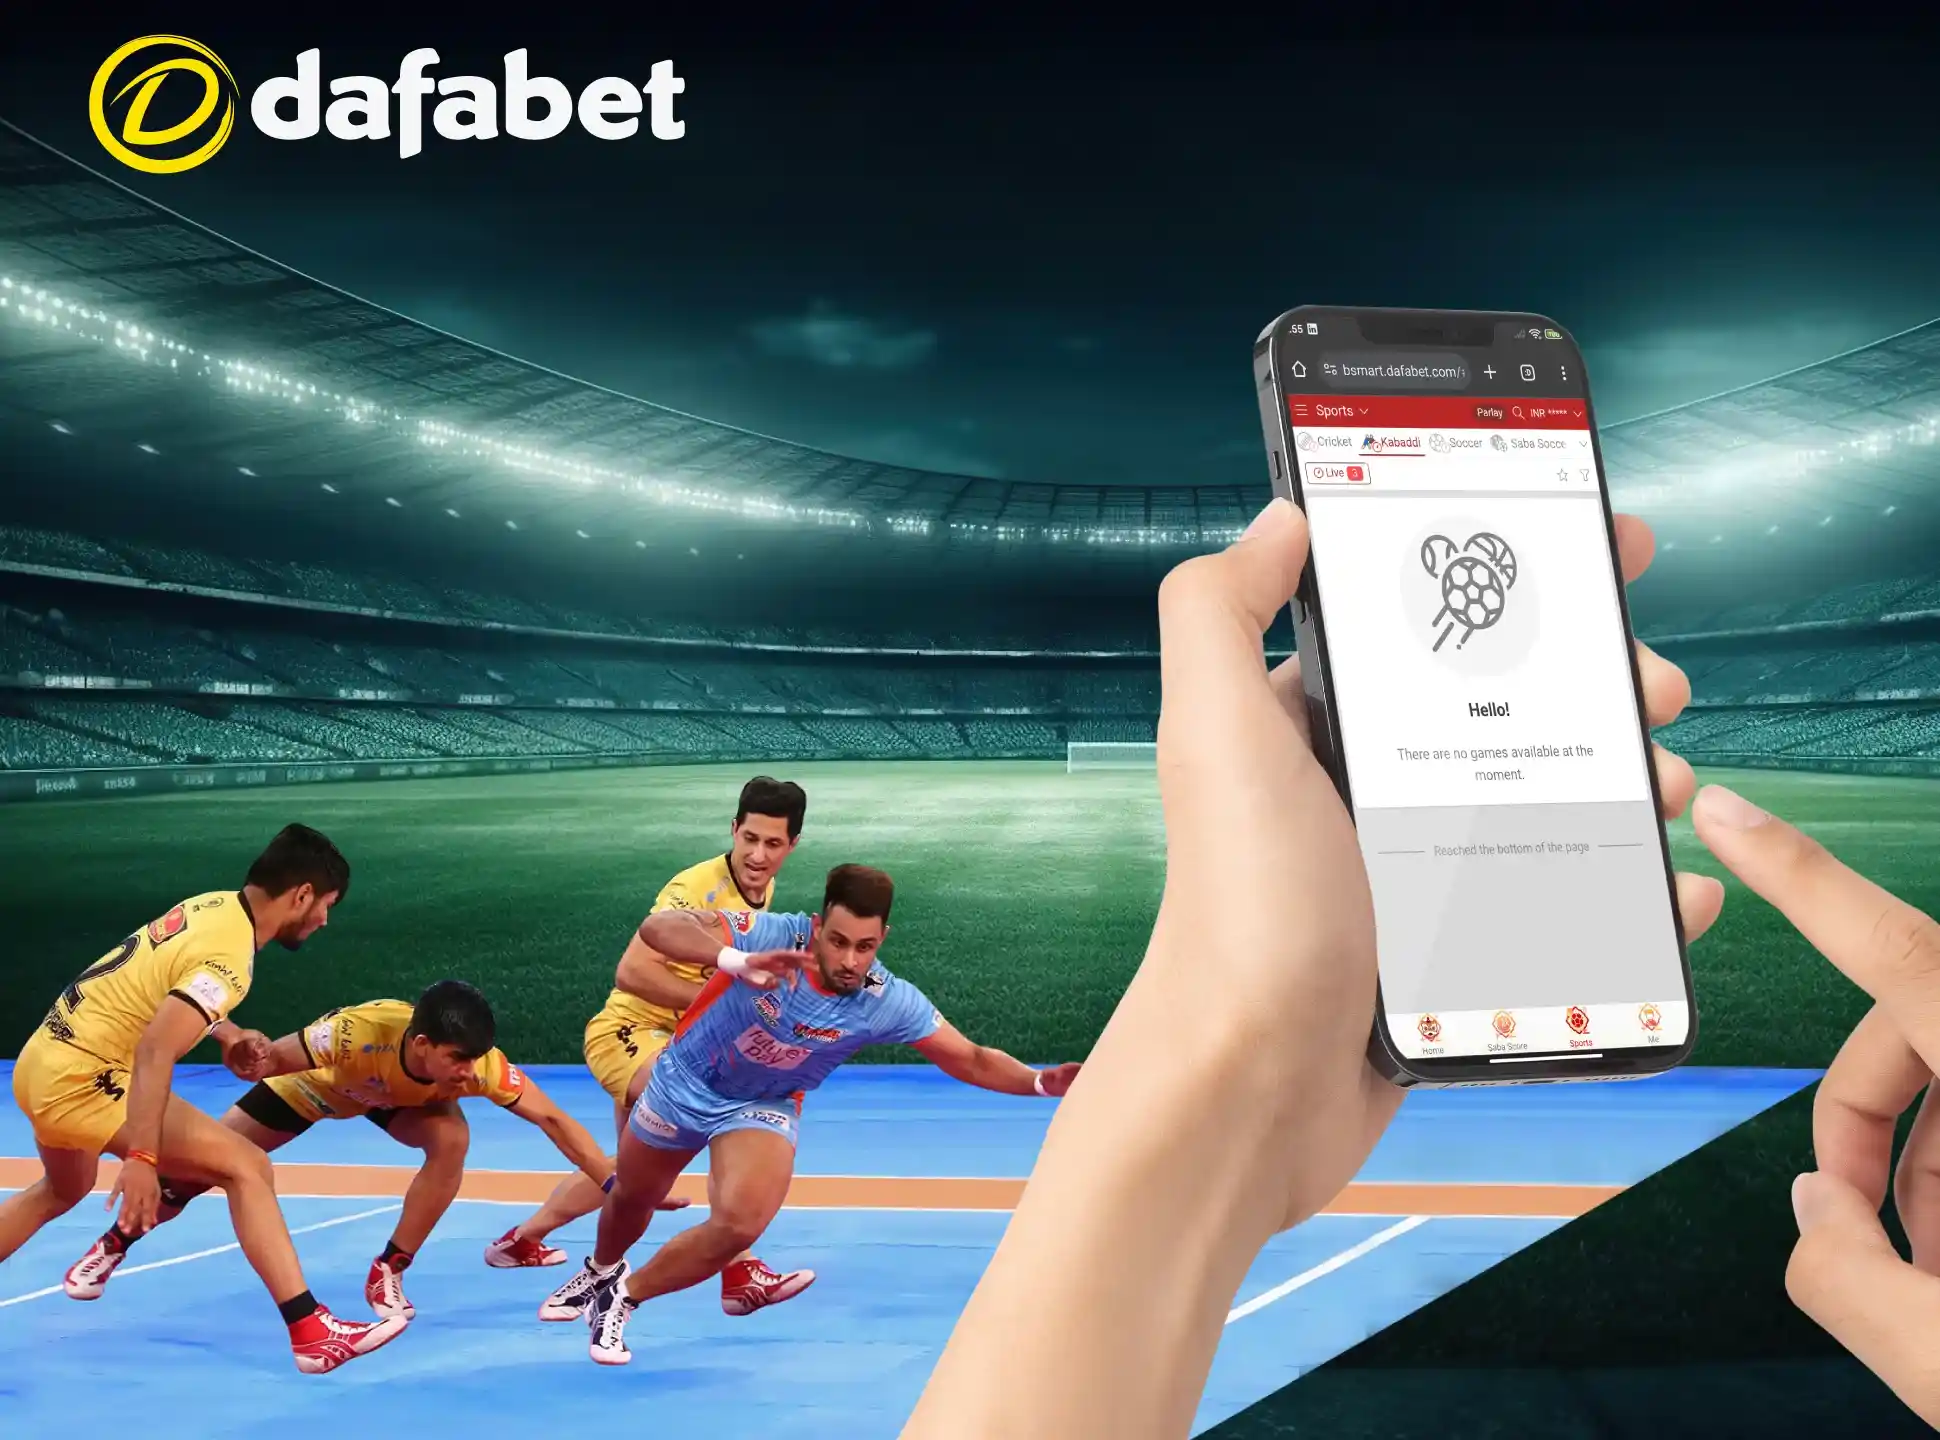 The Dafabet app has lots of sports betting including Kabaddi.